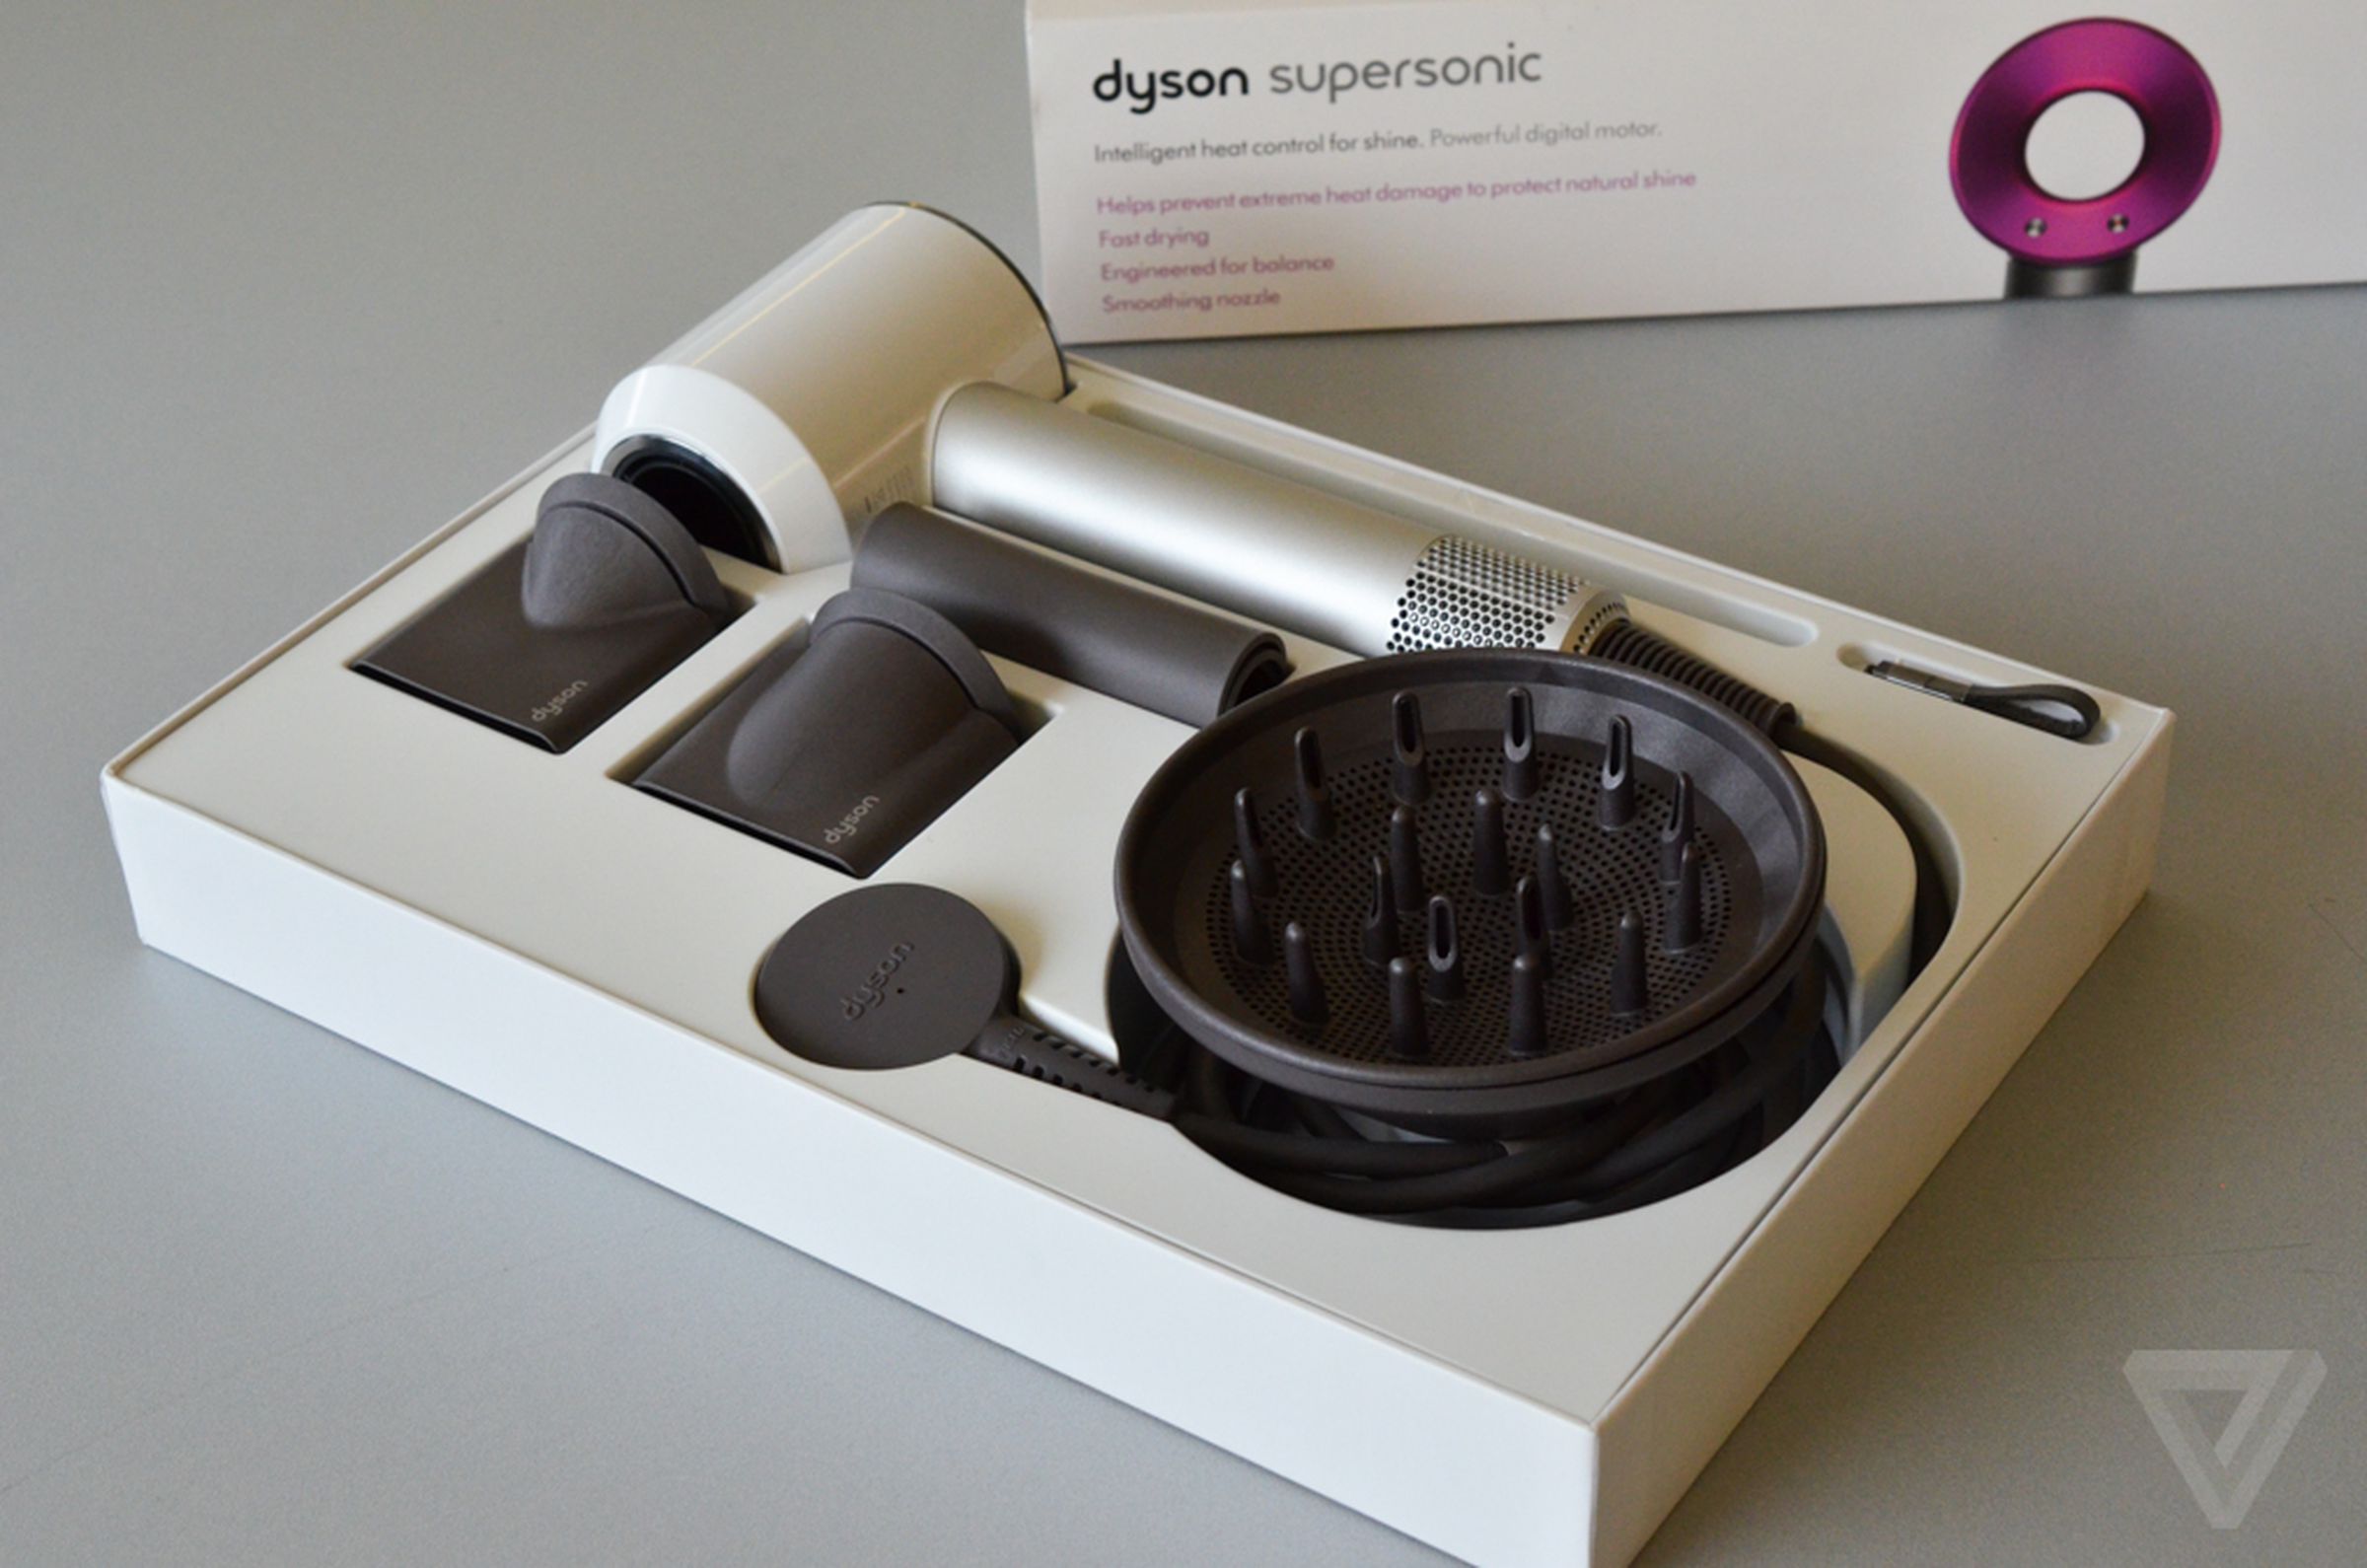 Dyson Supersonic hands-on photos